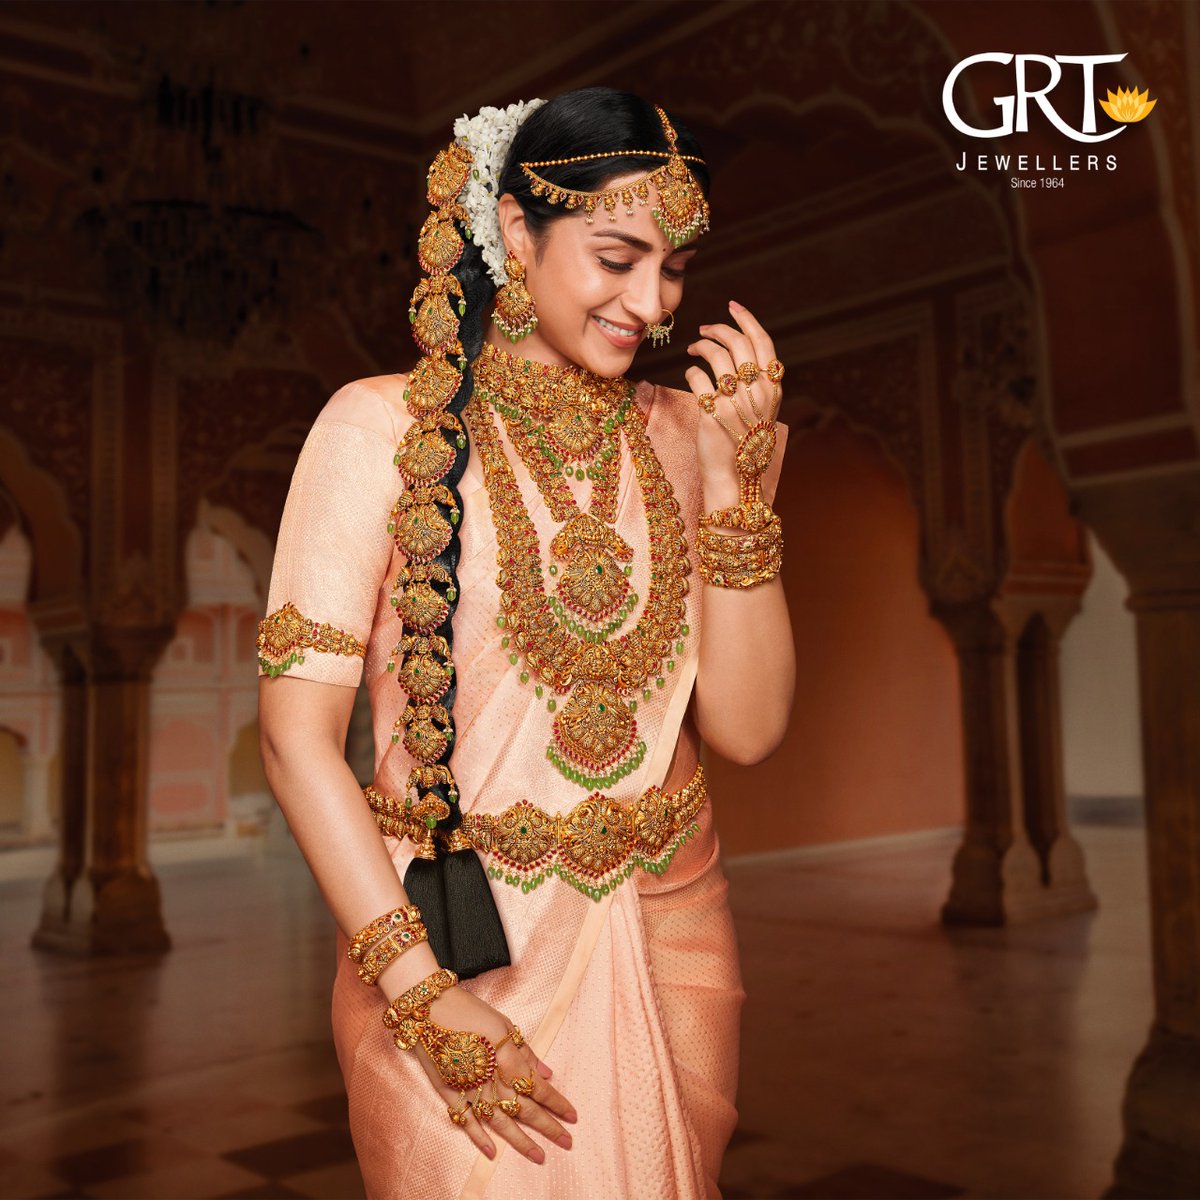 Buy Stunning Leaf Pattern Gold Ring |GRT Jewellers